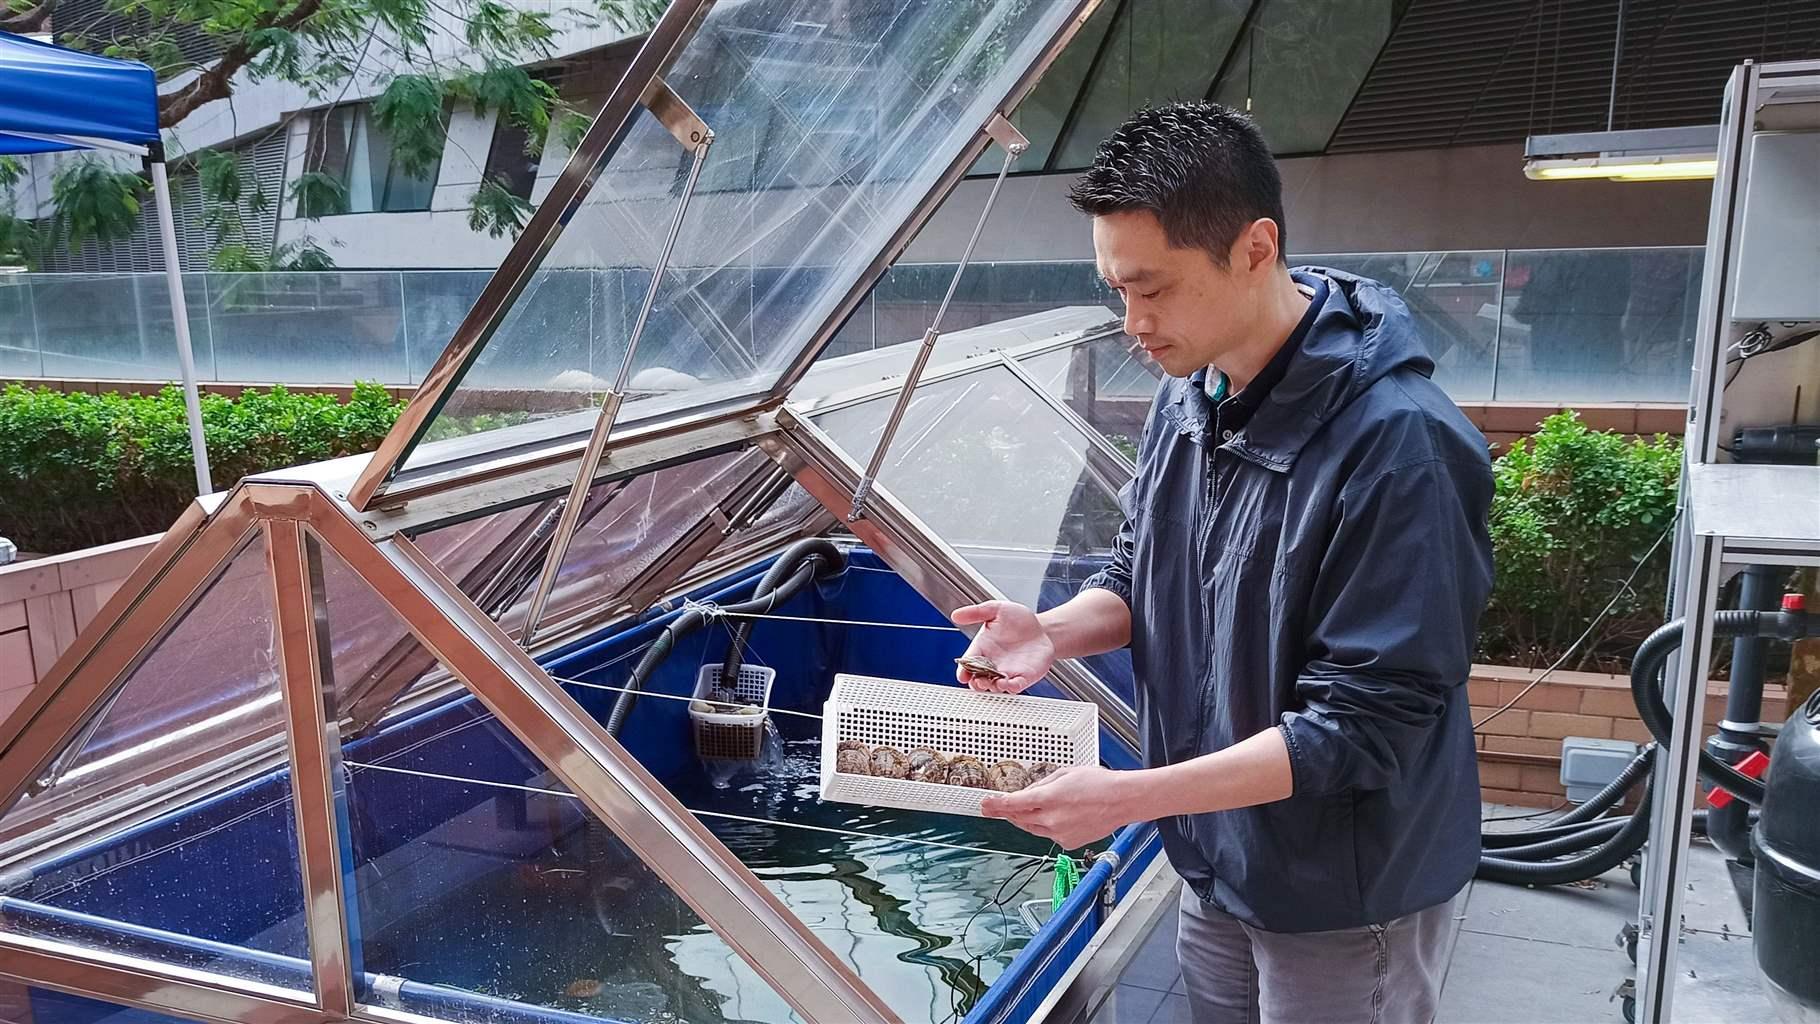 A man standing next to a blue outdoor tank with an open glass lid looks at an oyster that he is holding in his hand. With his other hand, he holds a small white tray containing several other oysters.